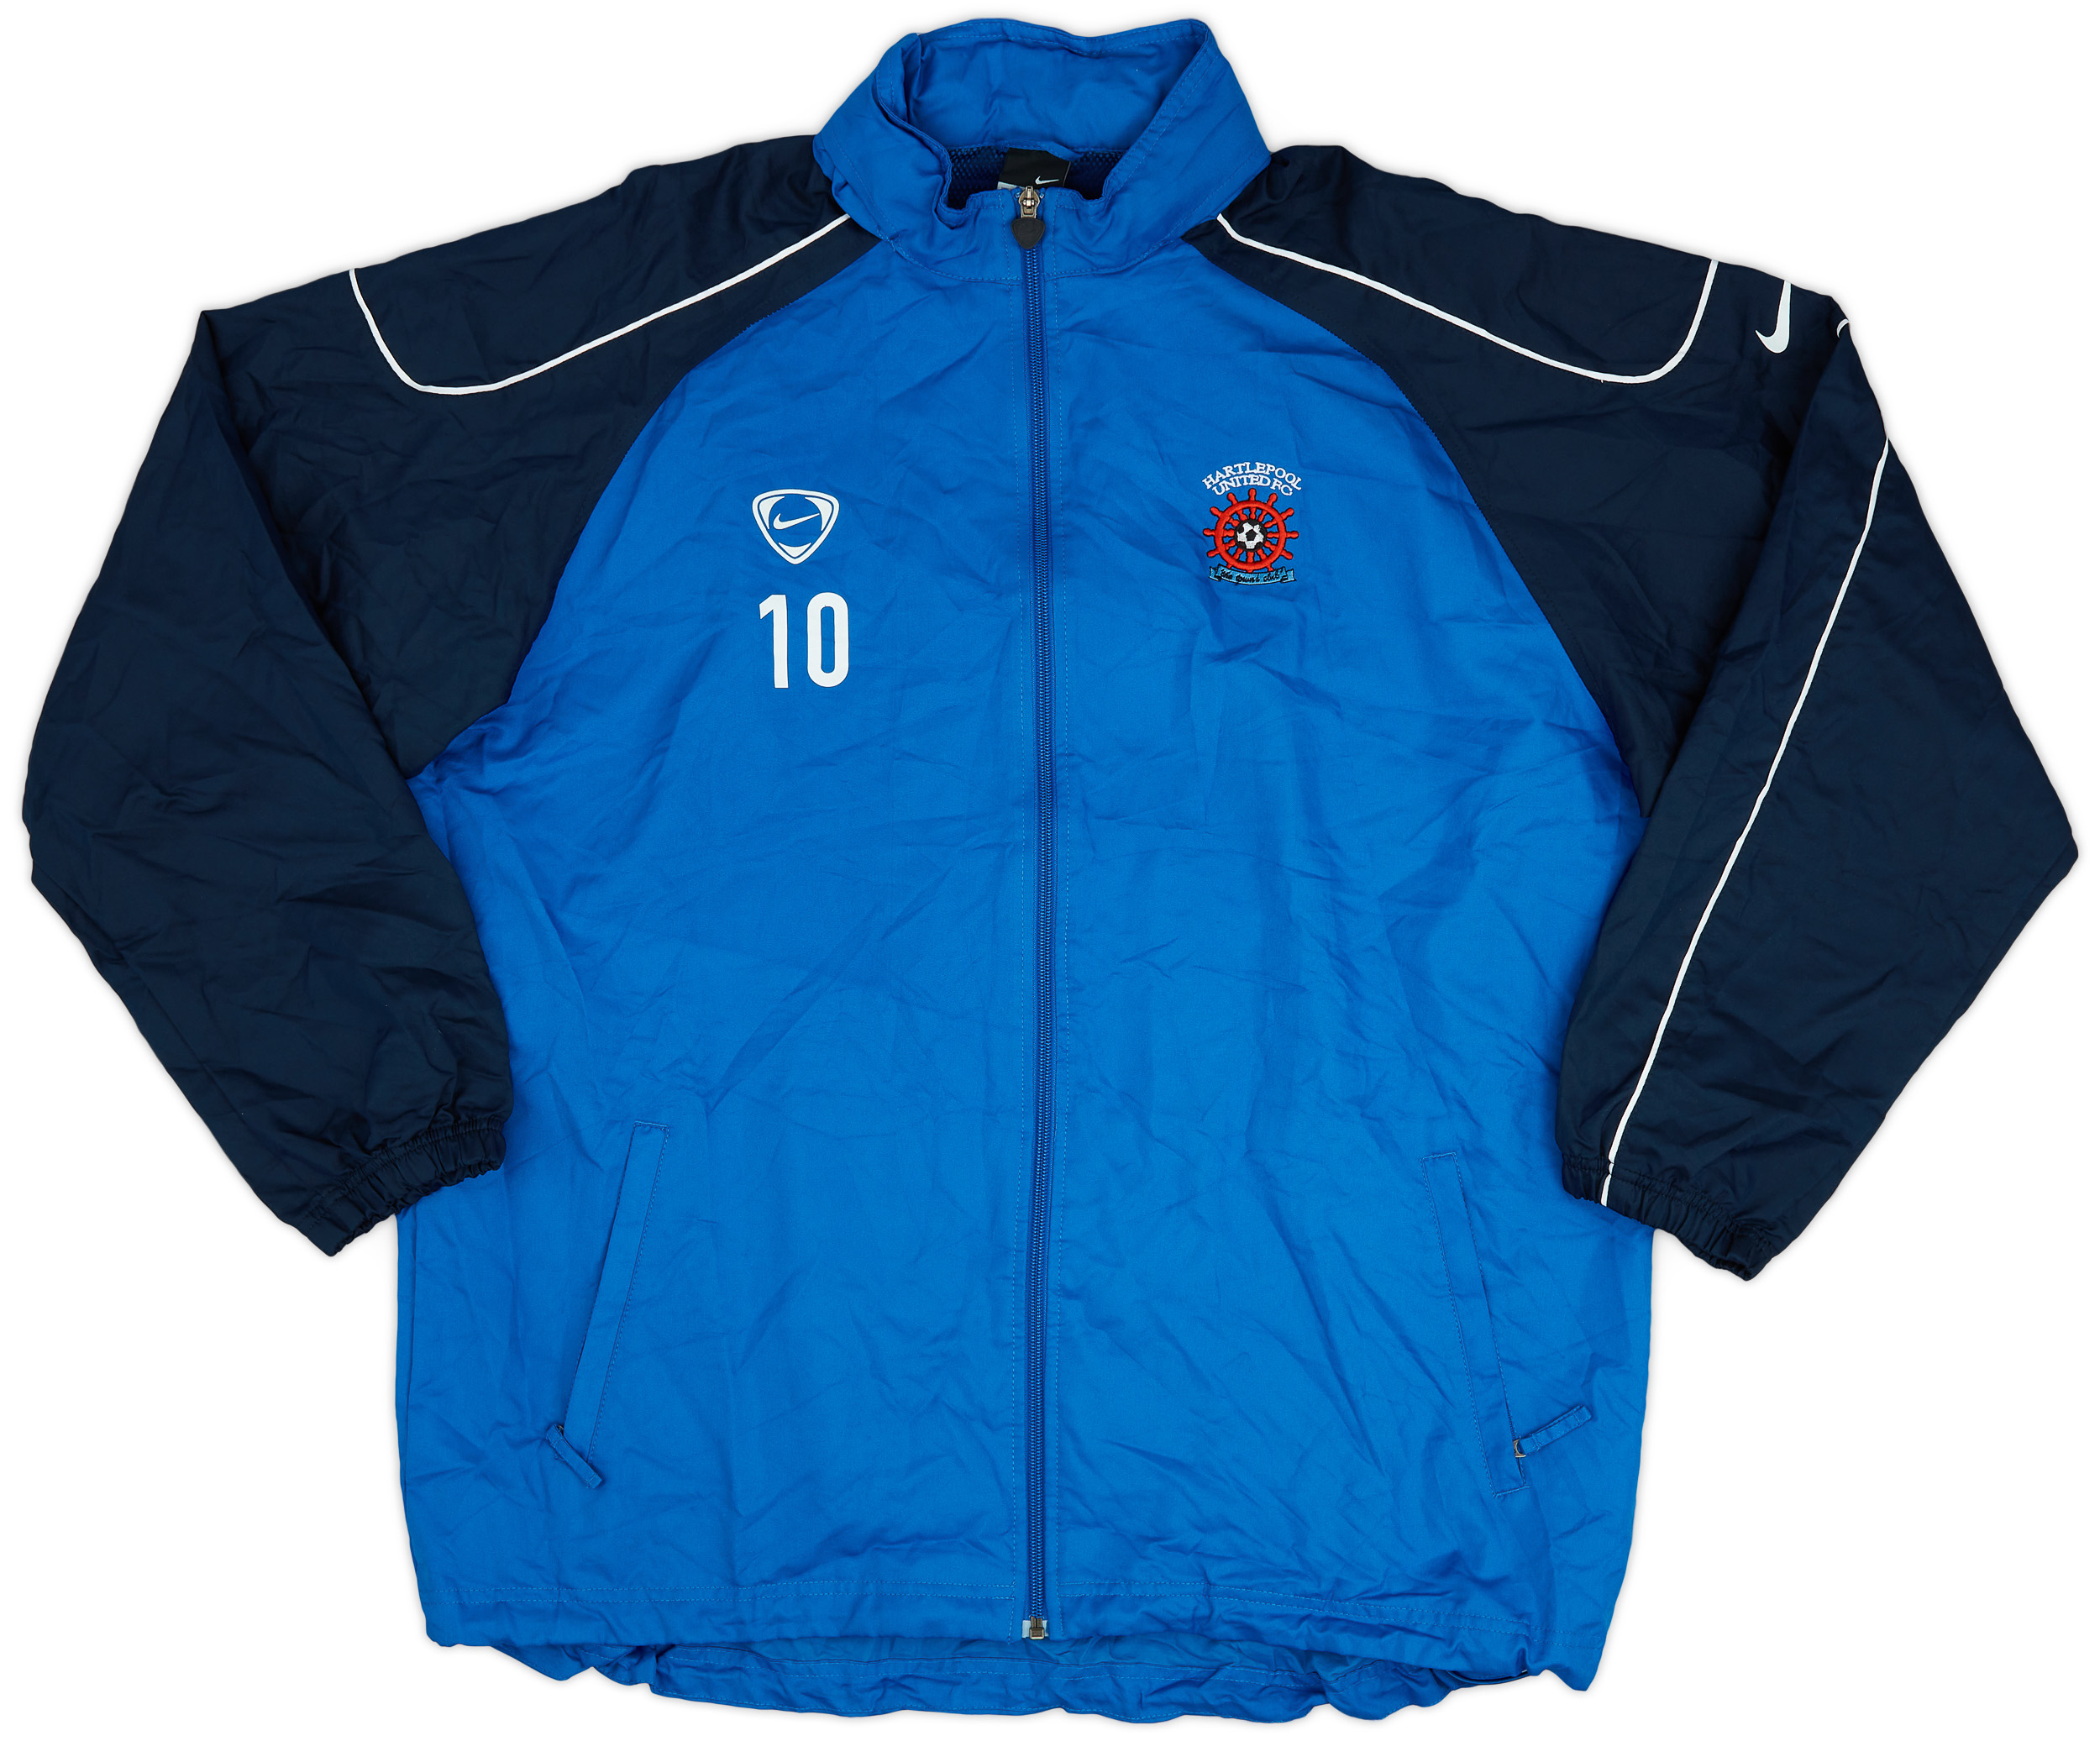 2006-07 Hartlepool Player Issue Track Jacket #10 - 10/10 - (XL)